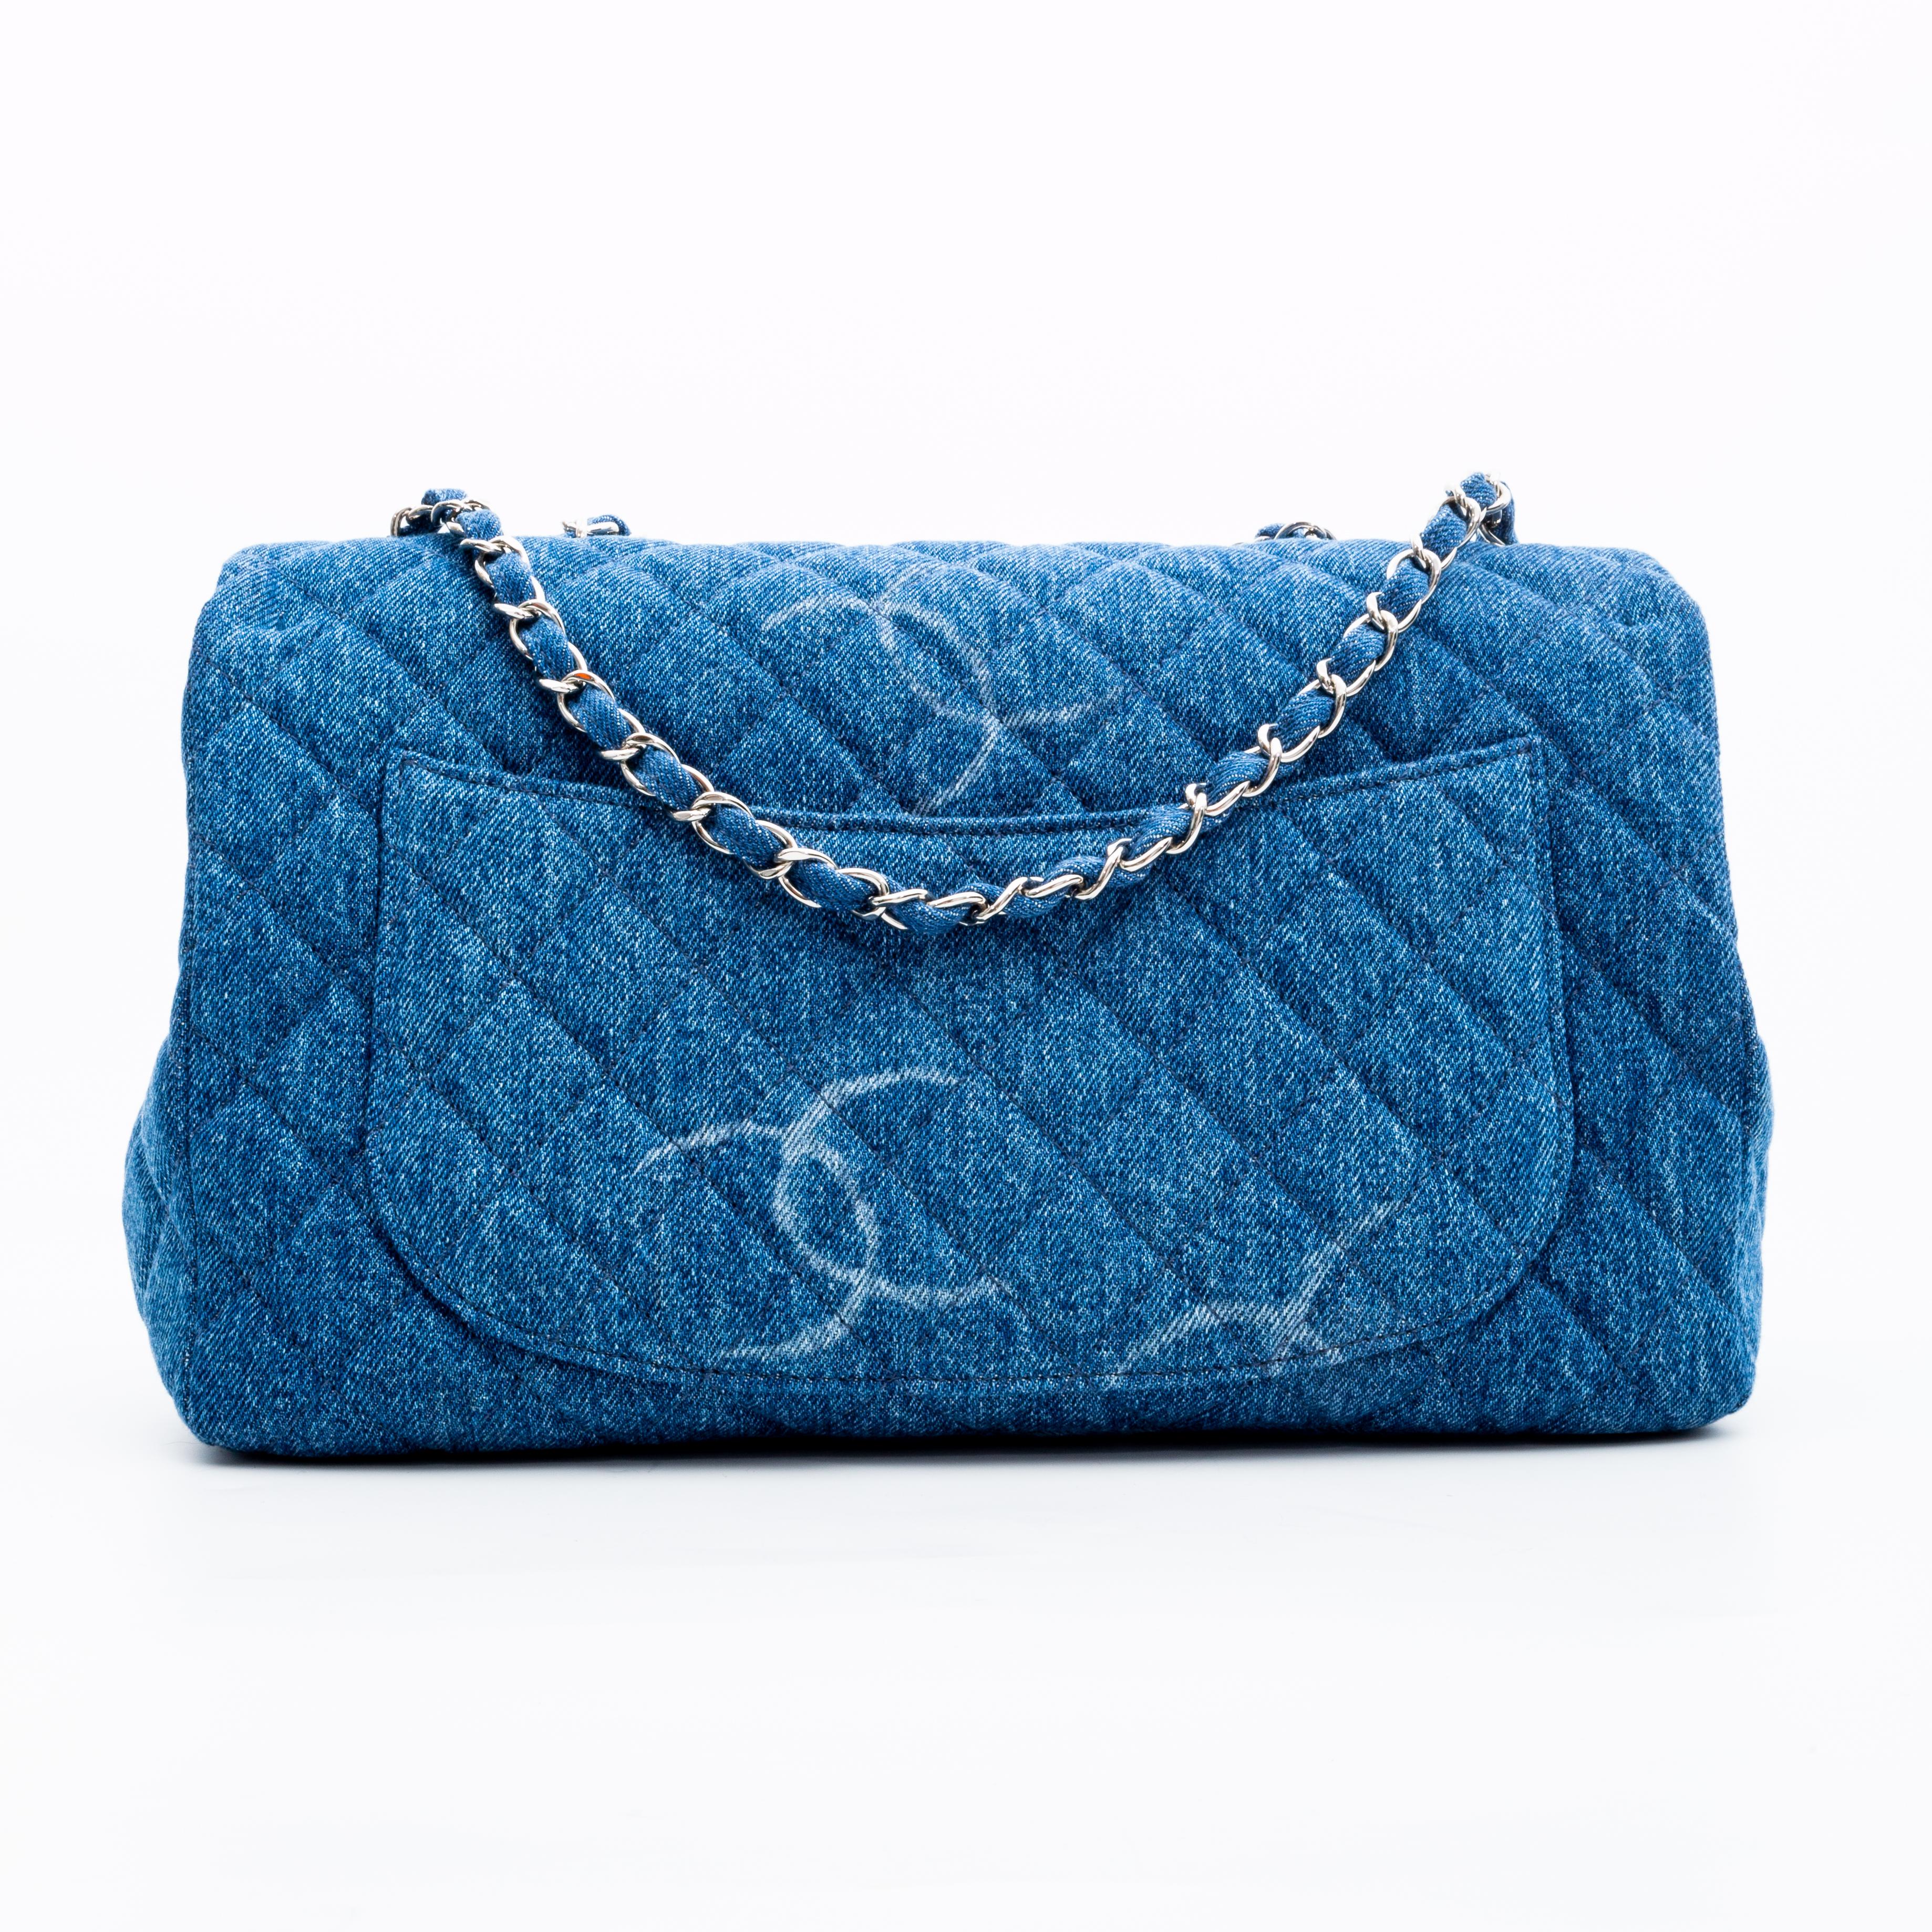 Jumbo Single Flap Bag from the Fall/Winter 20B Collection. This shoulder bag is made of diamond quilted denim in blue, with white Chanel logos printed throughout. The bag features a silver chain interlaced with denim, a front flap, CC turn-lock